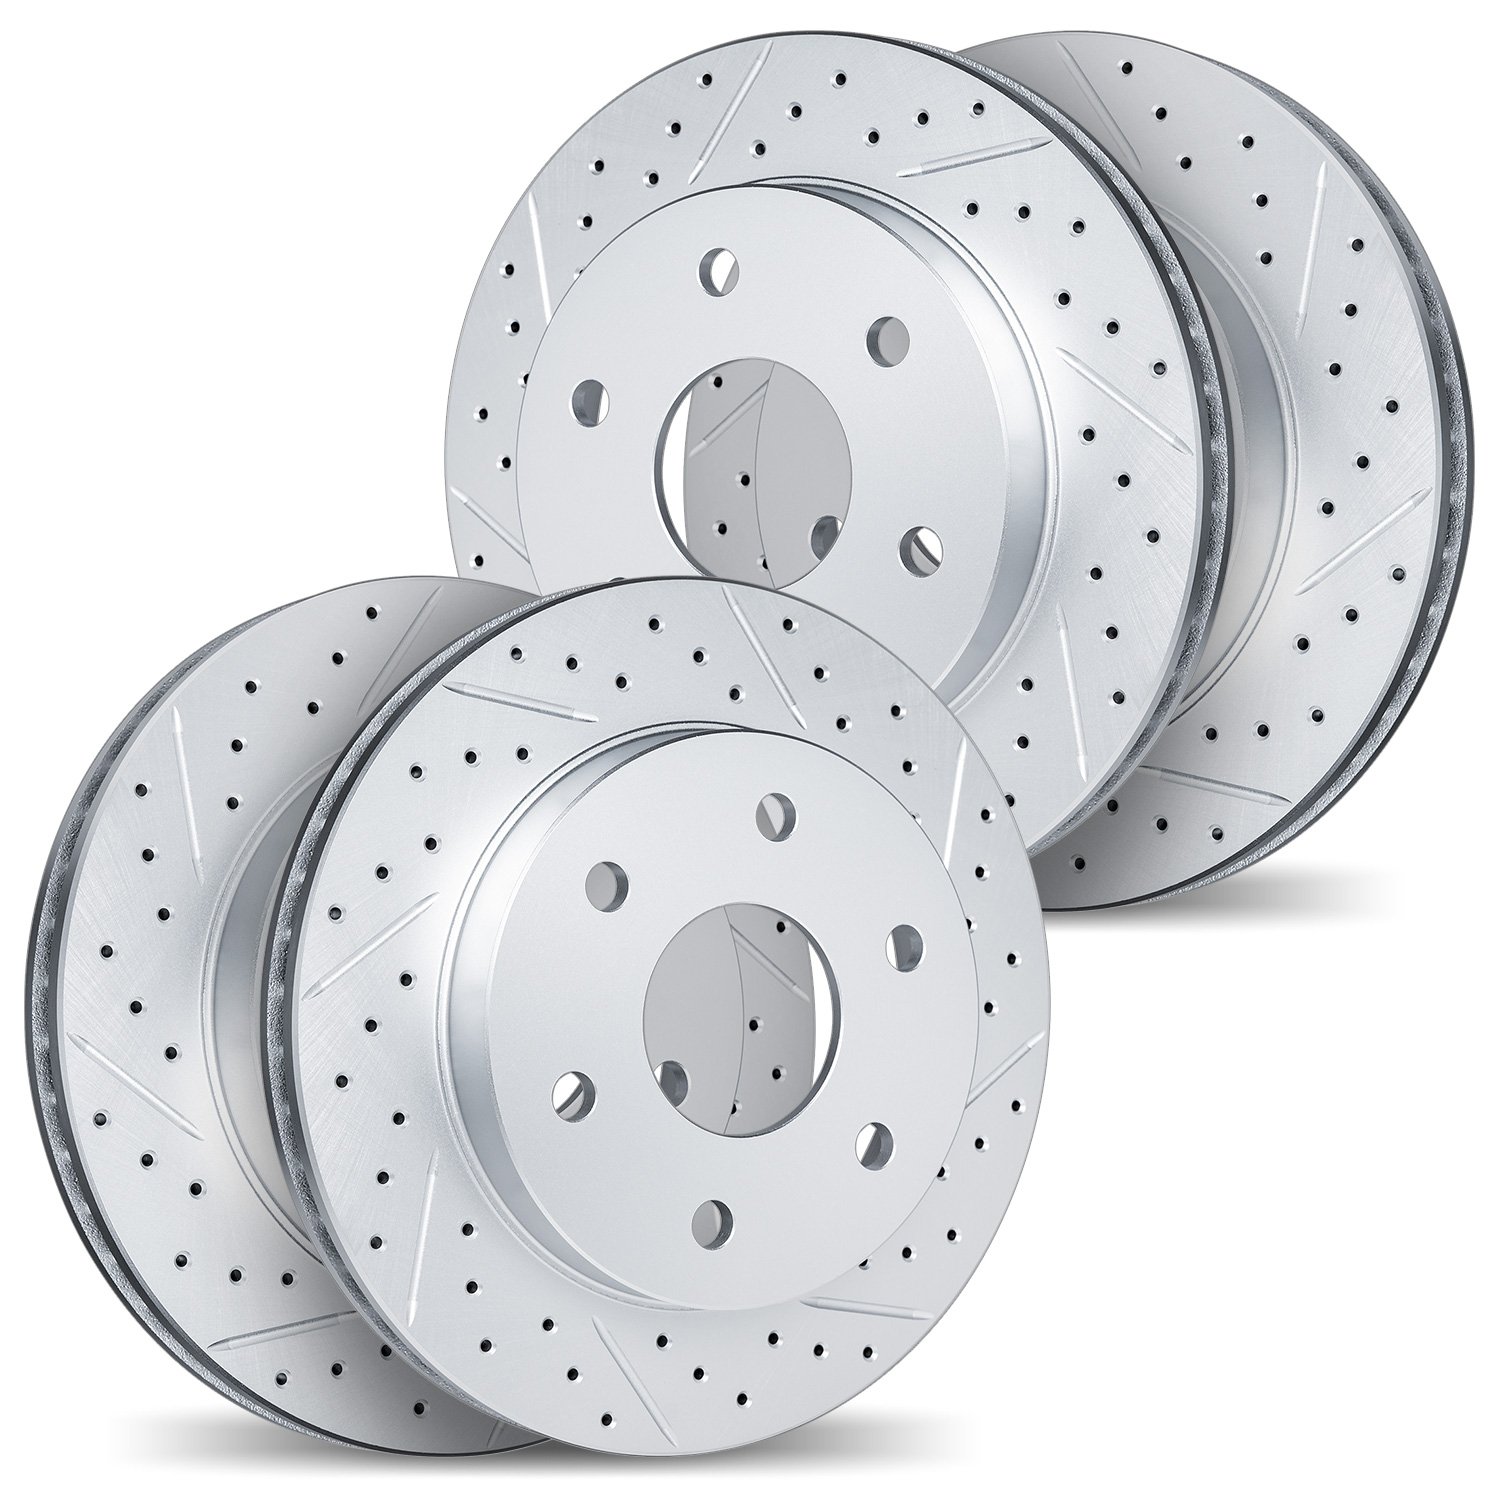 2004-76008 Geoperformance Drilled/Slotted Brake Rotors, Fits Select Lexus/Toyota/Scion, Position: Front and Rear